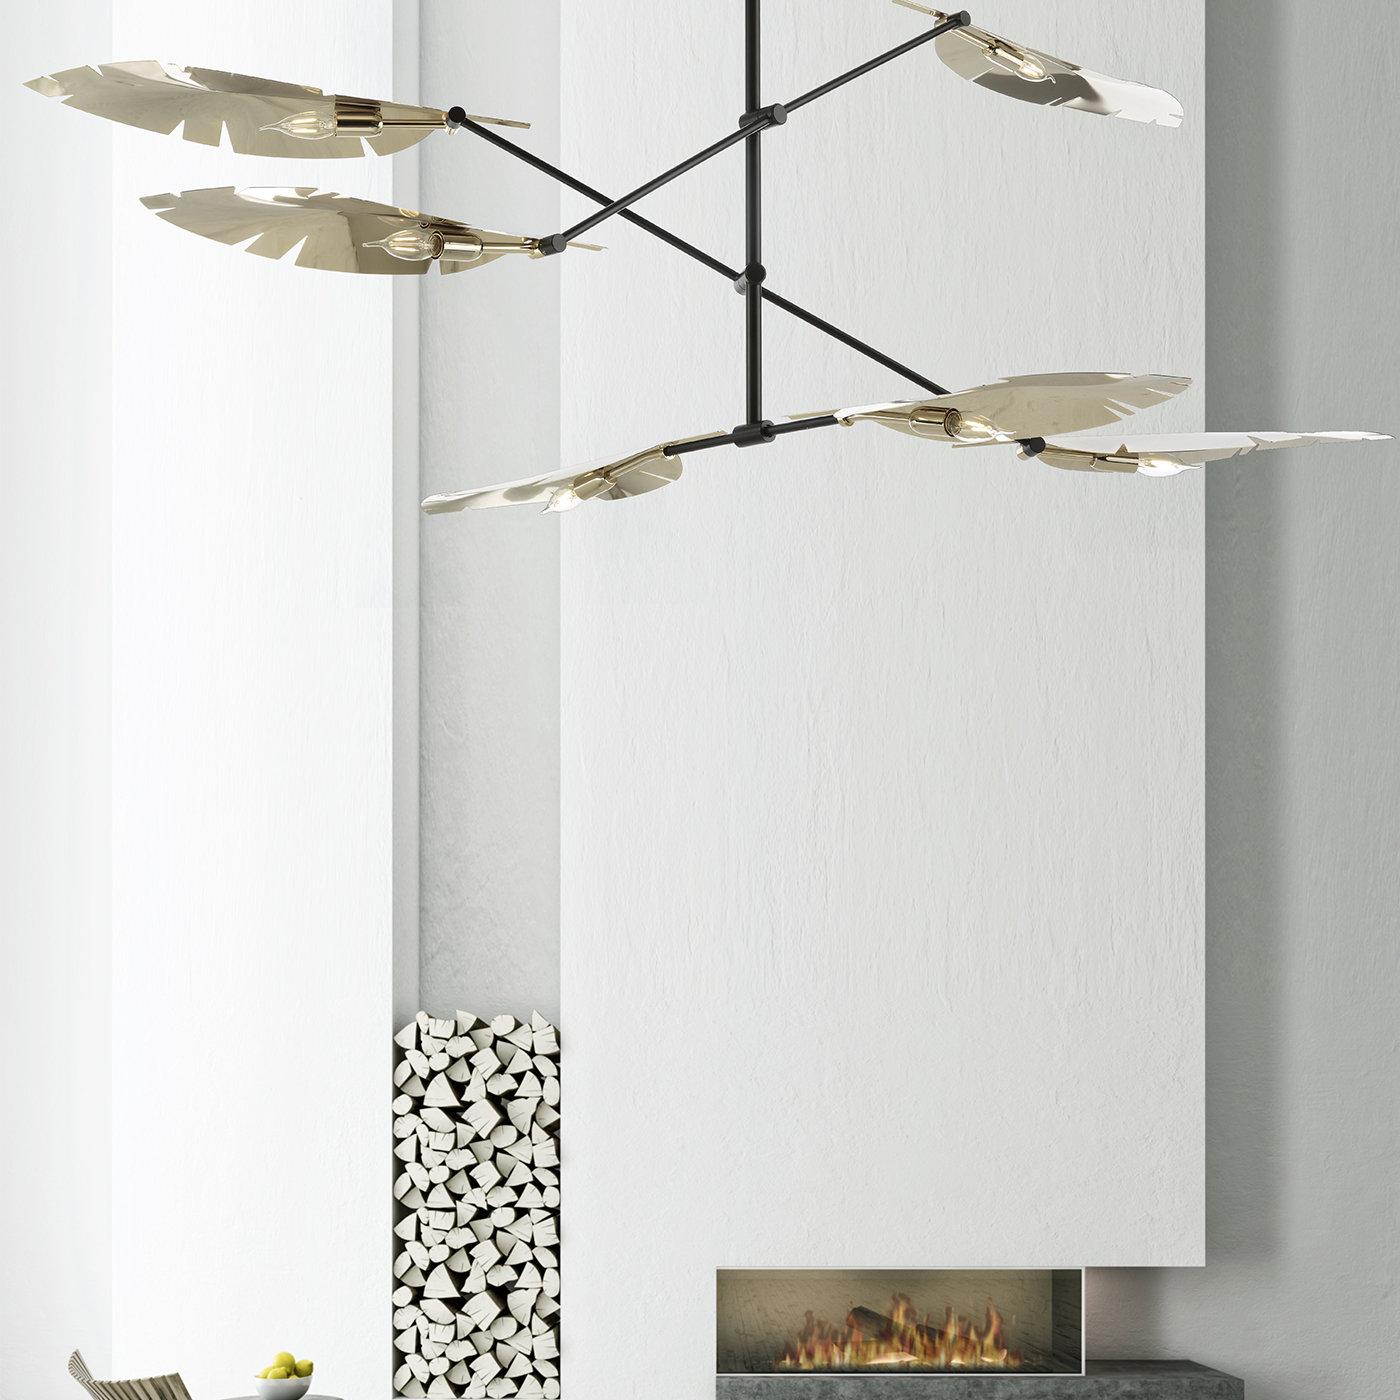 A stylish take on the playful mobile design, this nature-inspired chandelier features three slender linear bars mounted on a central pole, holding two leaf-shaped shades at each end. The matte black metal frame complements the pale gold finish of